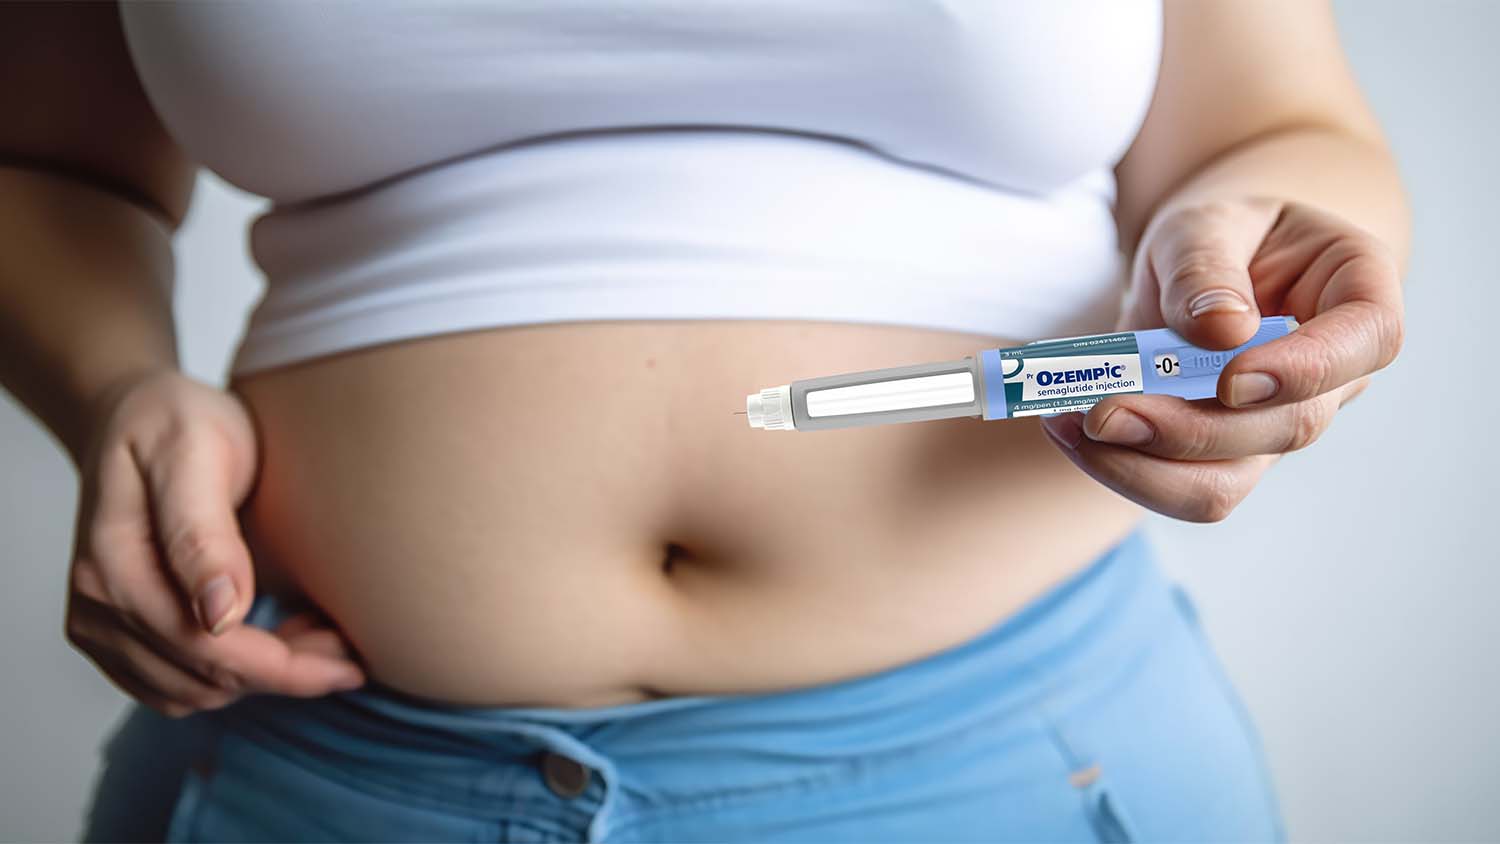 a woman injecting Ozempic into her stomach